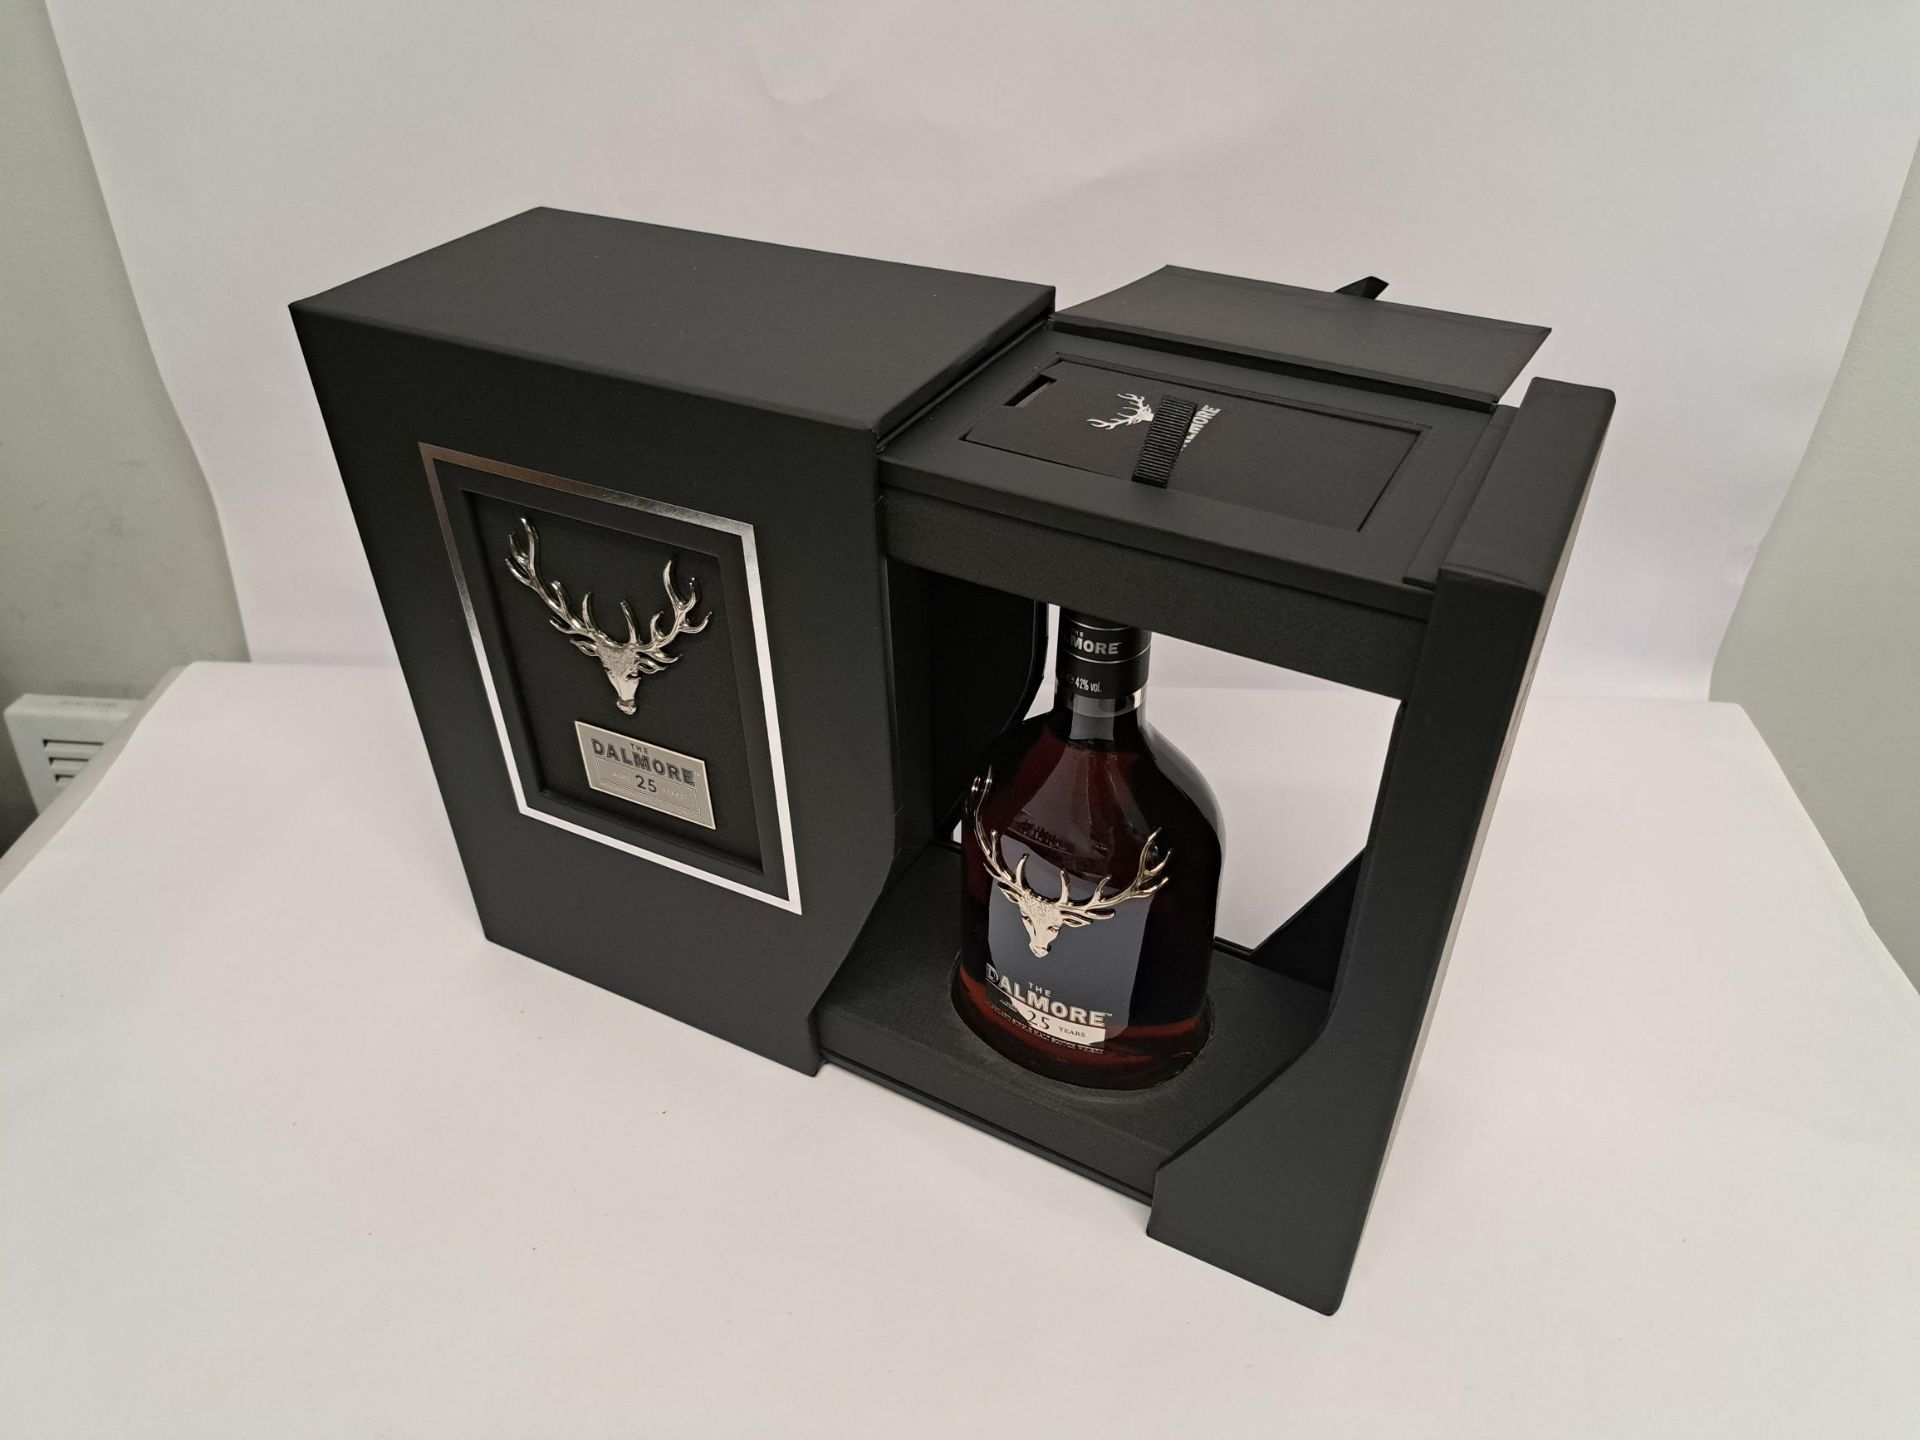 The Dalmore Aged 25 Year Highland Single Malt Scotch Whisky 700ml. Box Unsealed By Staff Member to c - Image 8 of 8